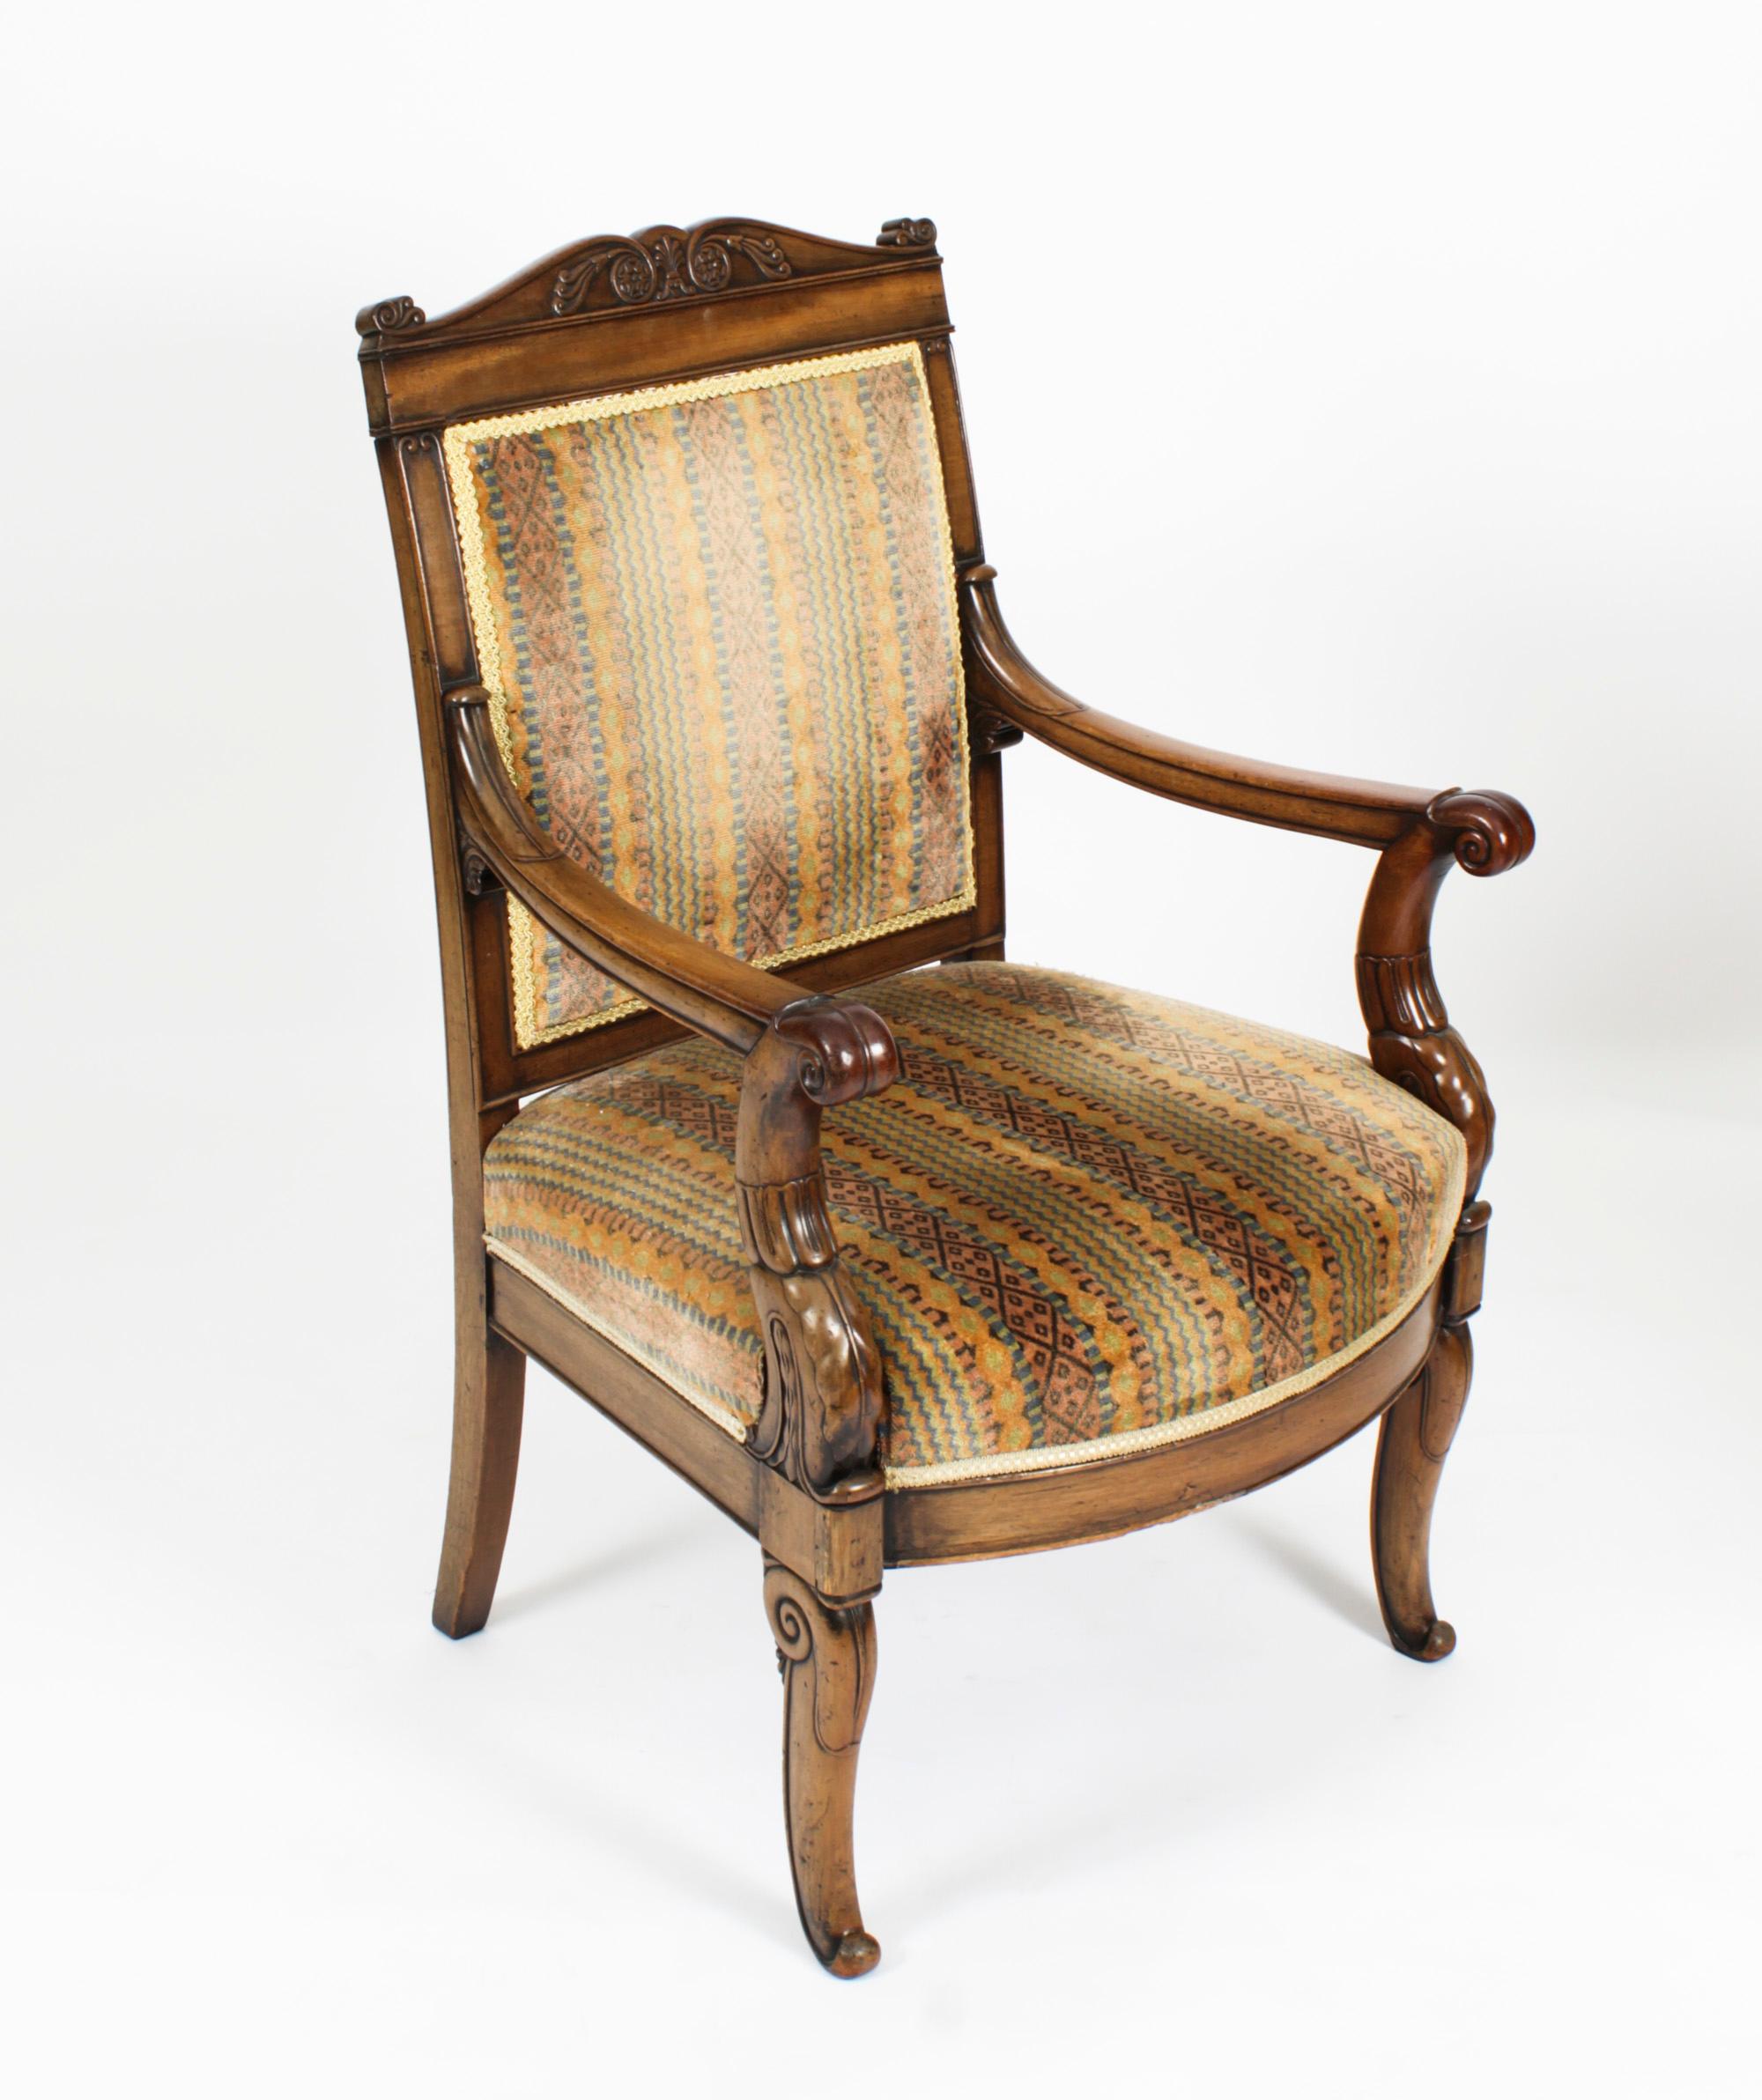 Antique Pair French Empire Armchair Fauteuils Chairs, 19th Century In Good Condition For Sale In London, GB